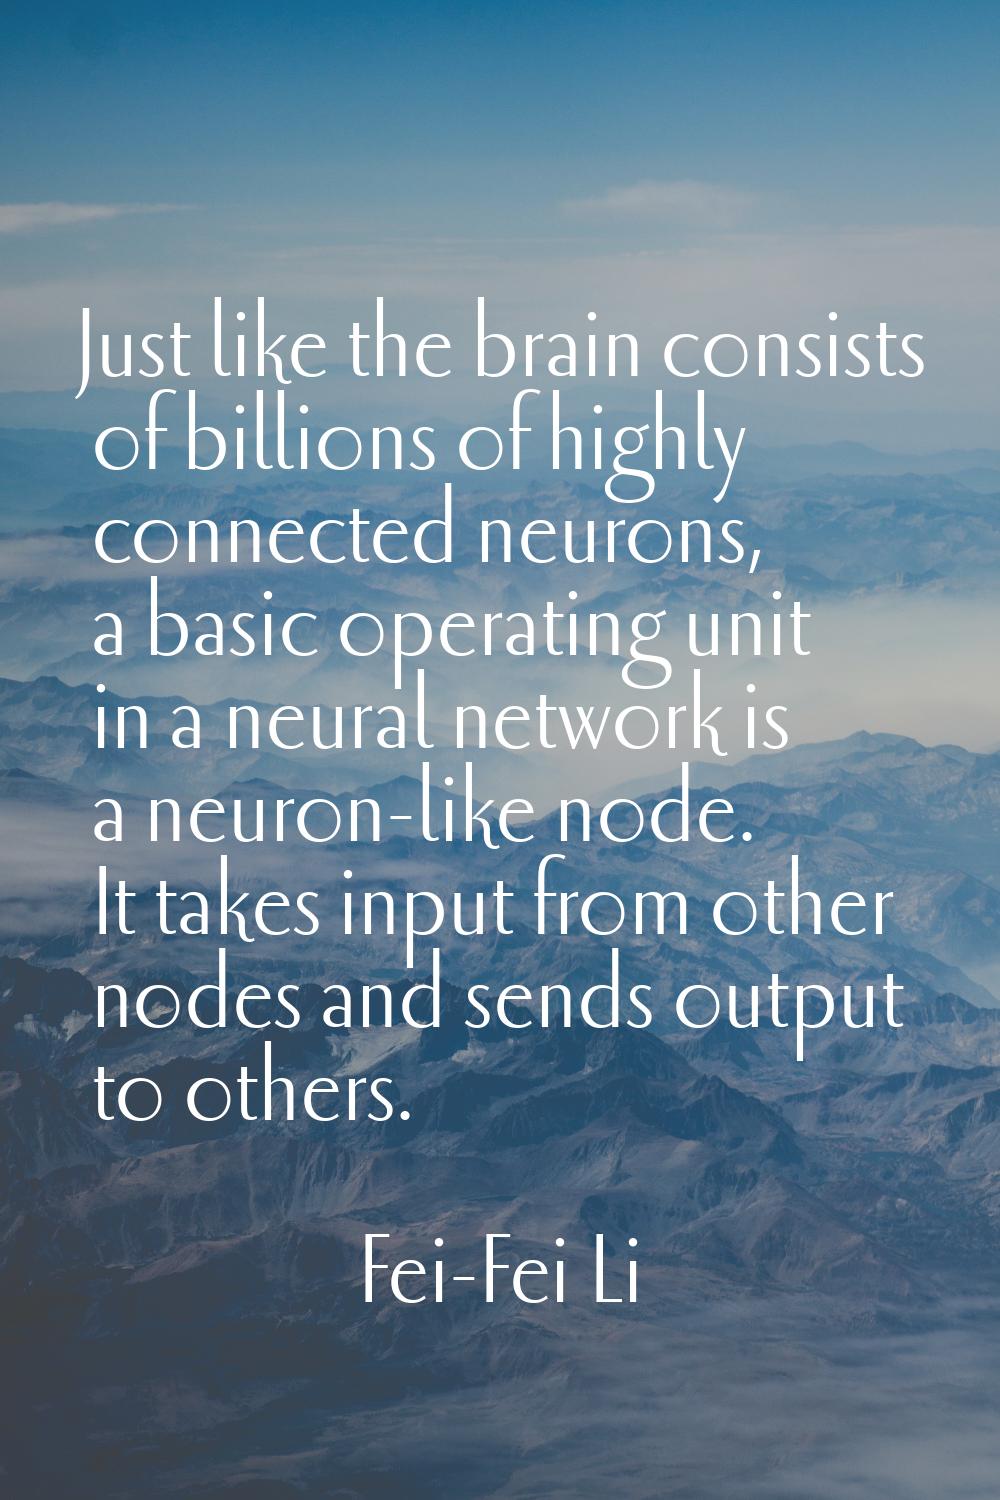 Just like the brain consists of billions of highly connected neurons, a basic operating unit in a n